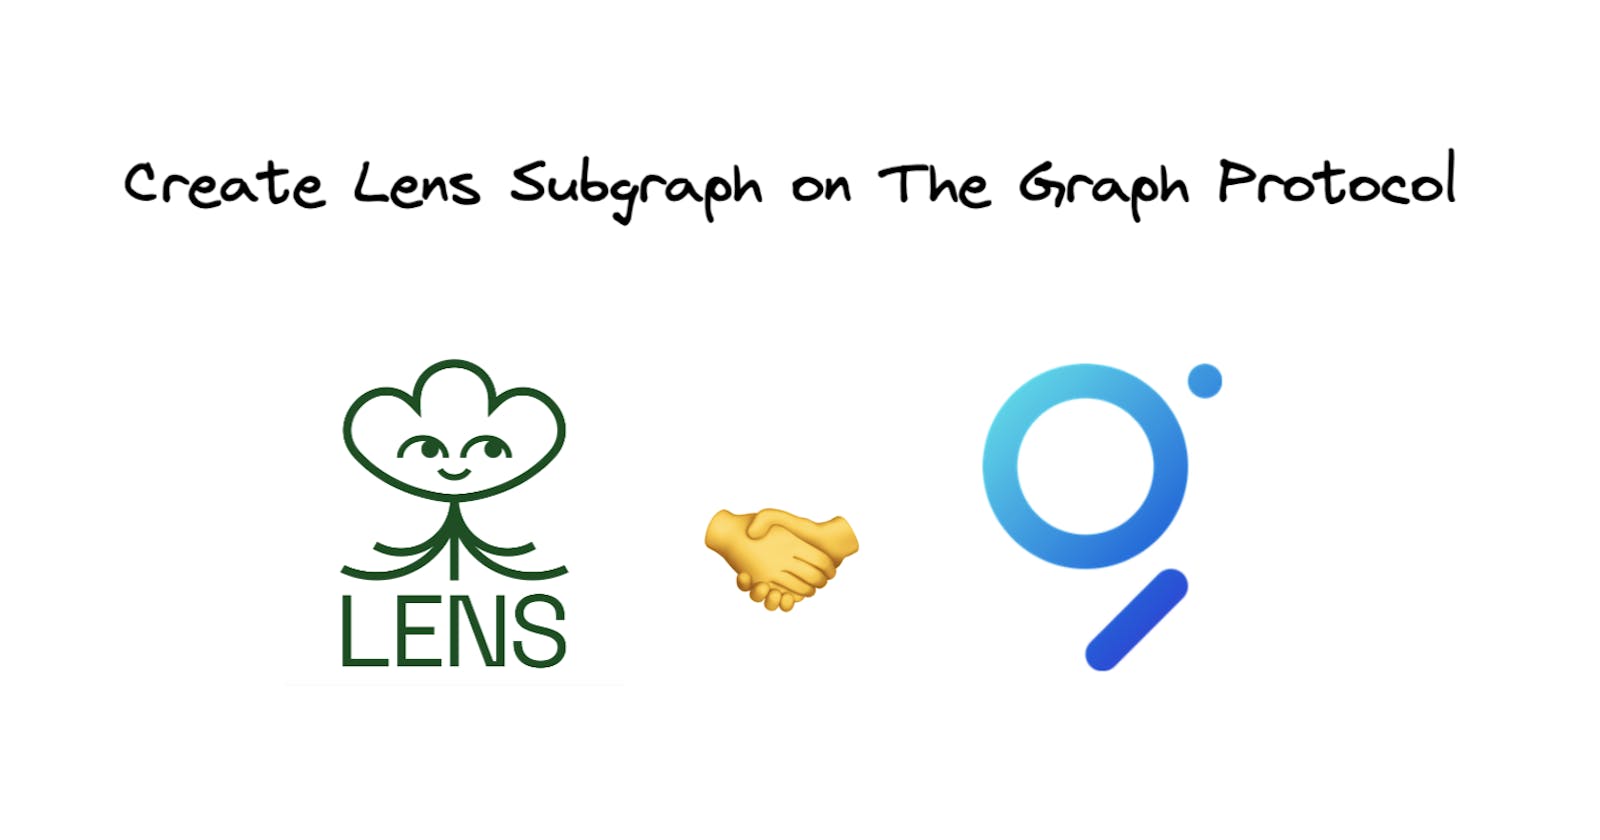 Create Lens Subgraph on The Graph Protocol